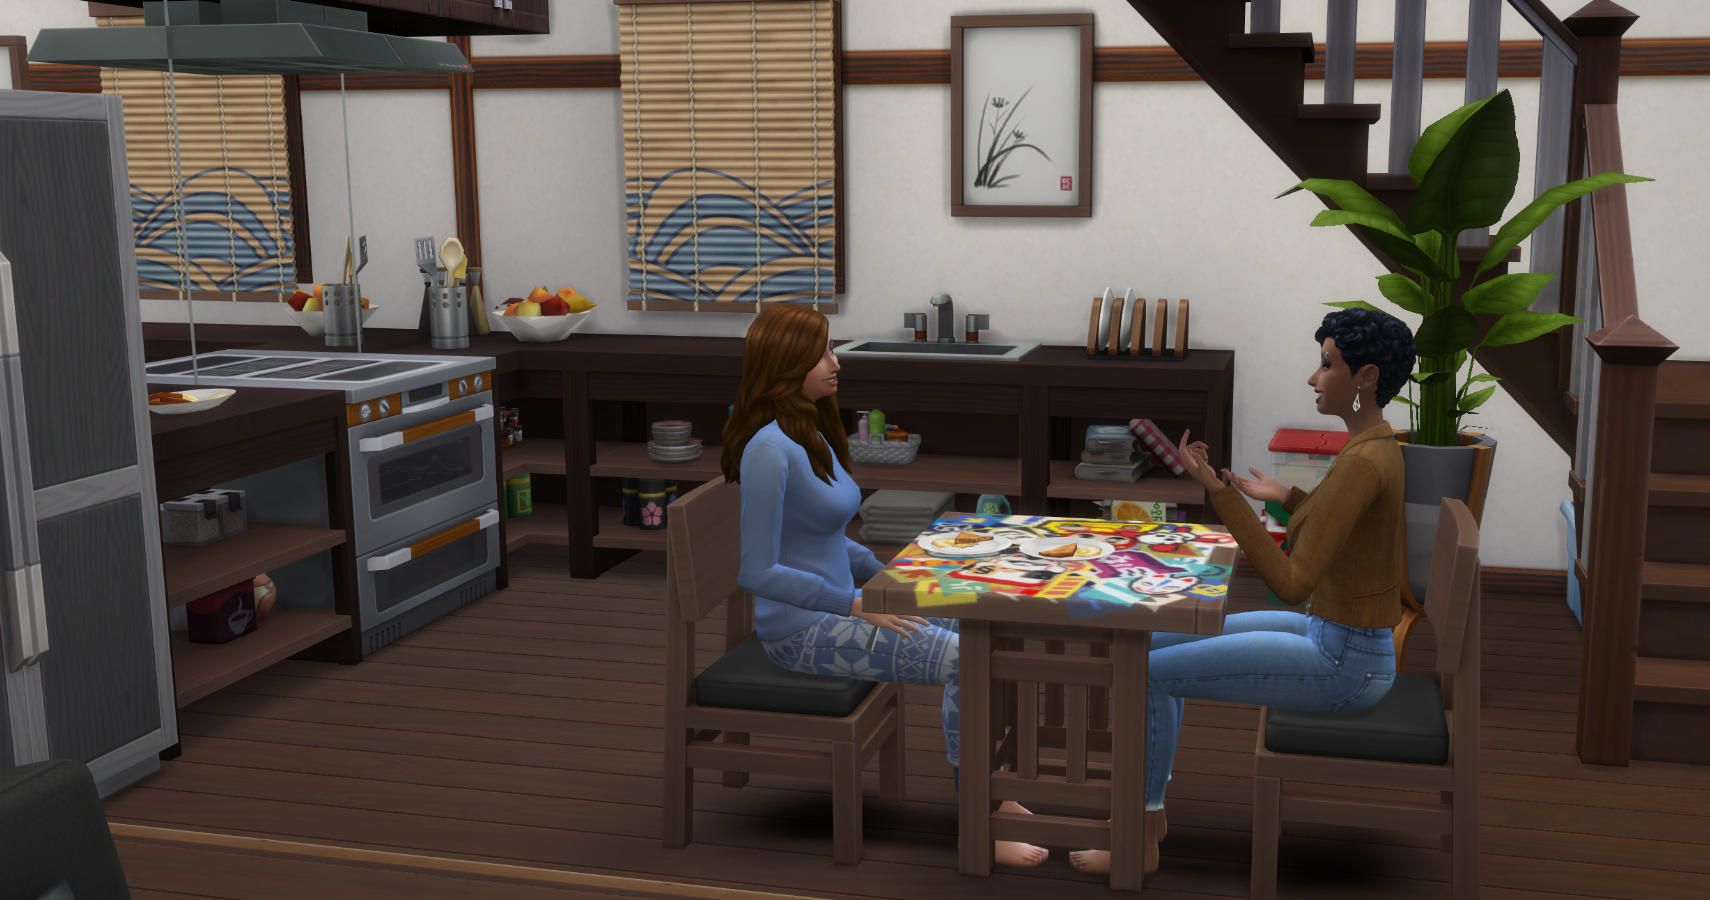 two sims eating a meal together at home.